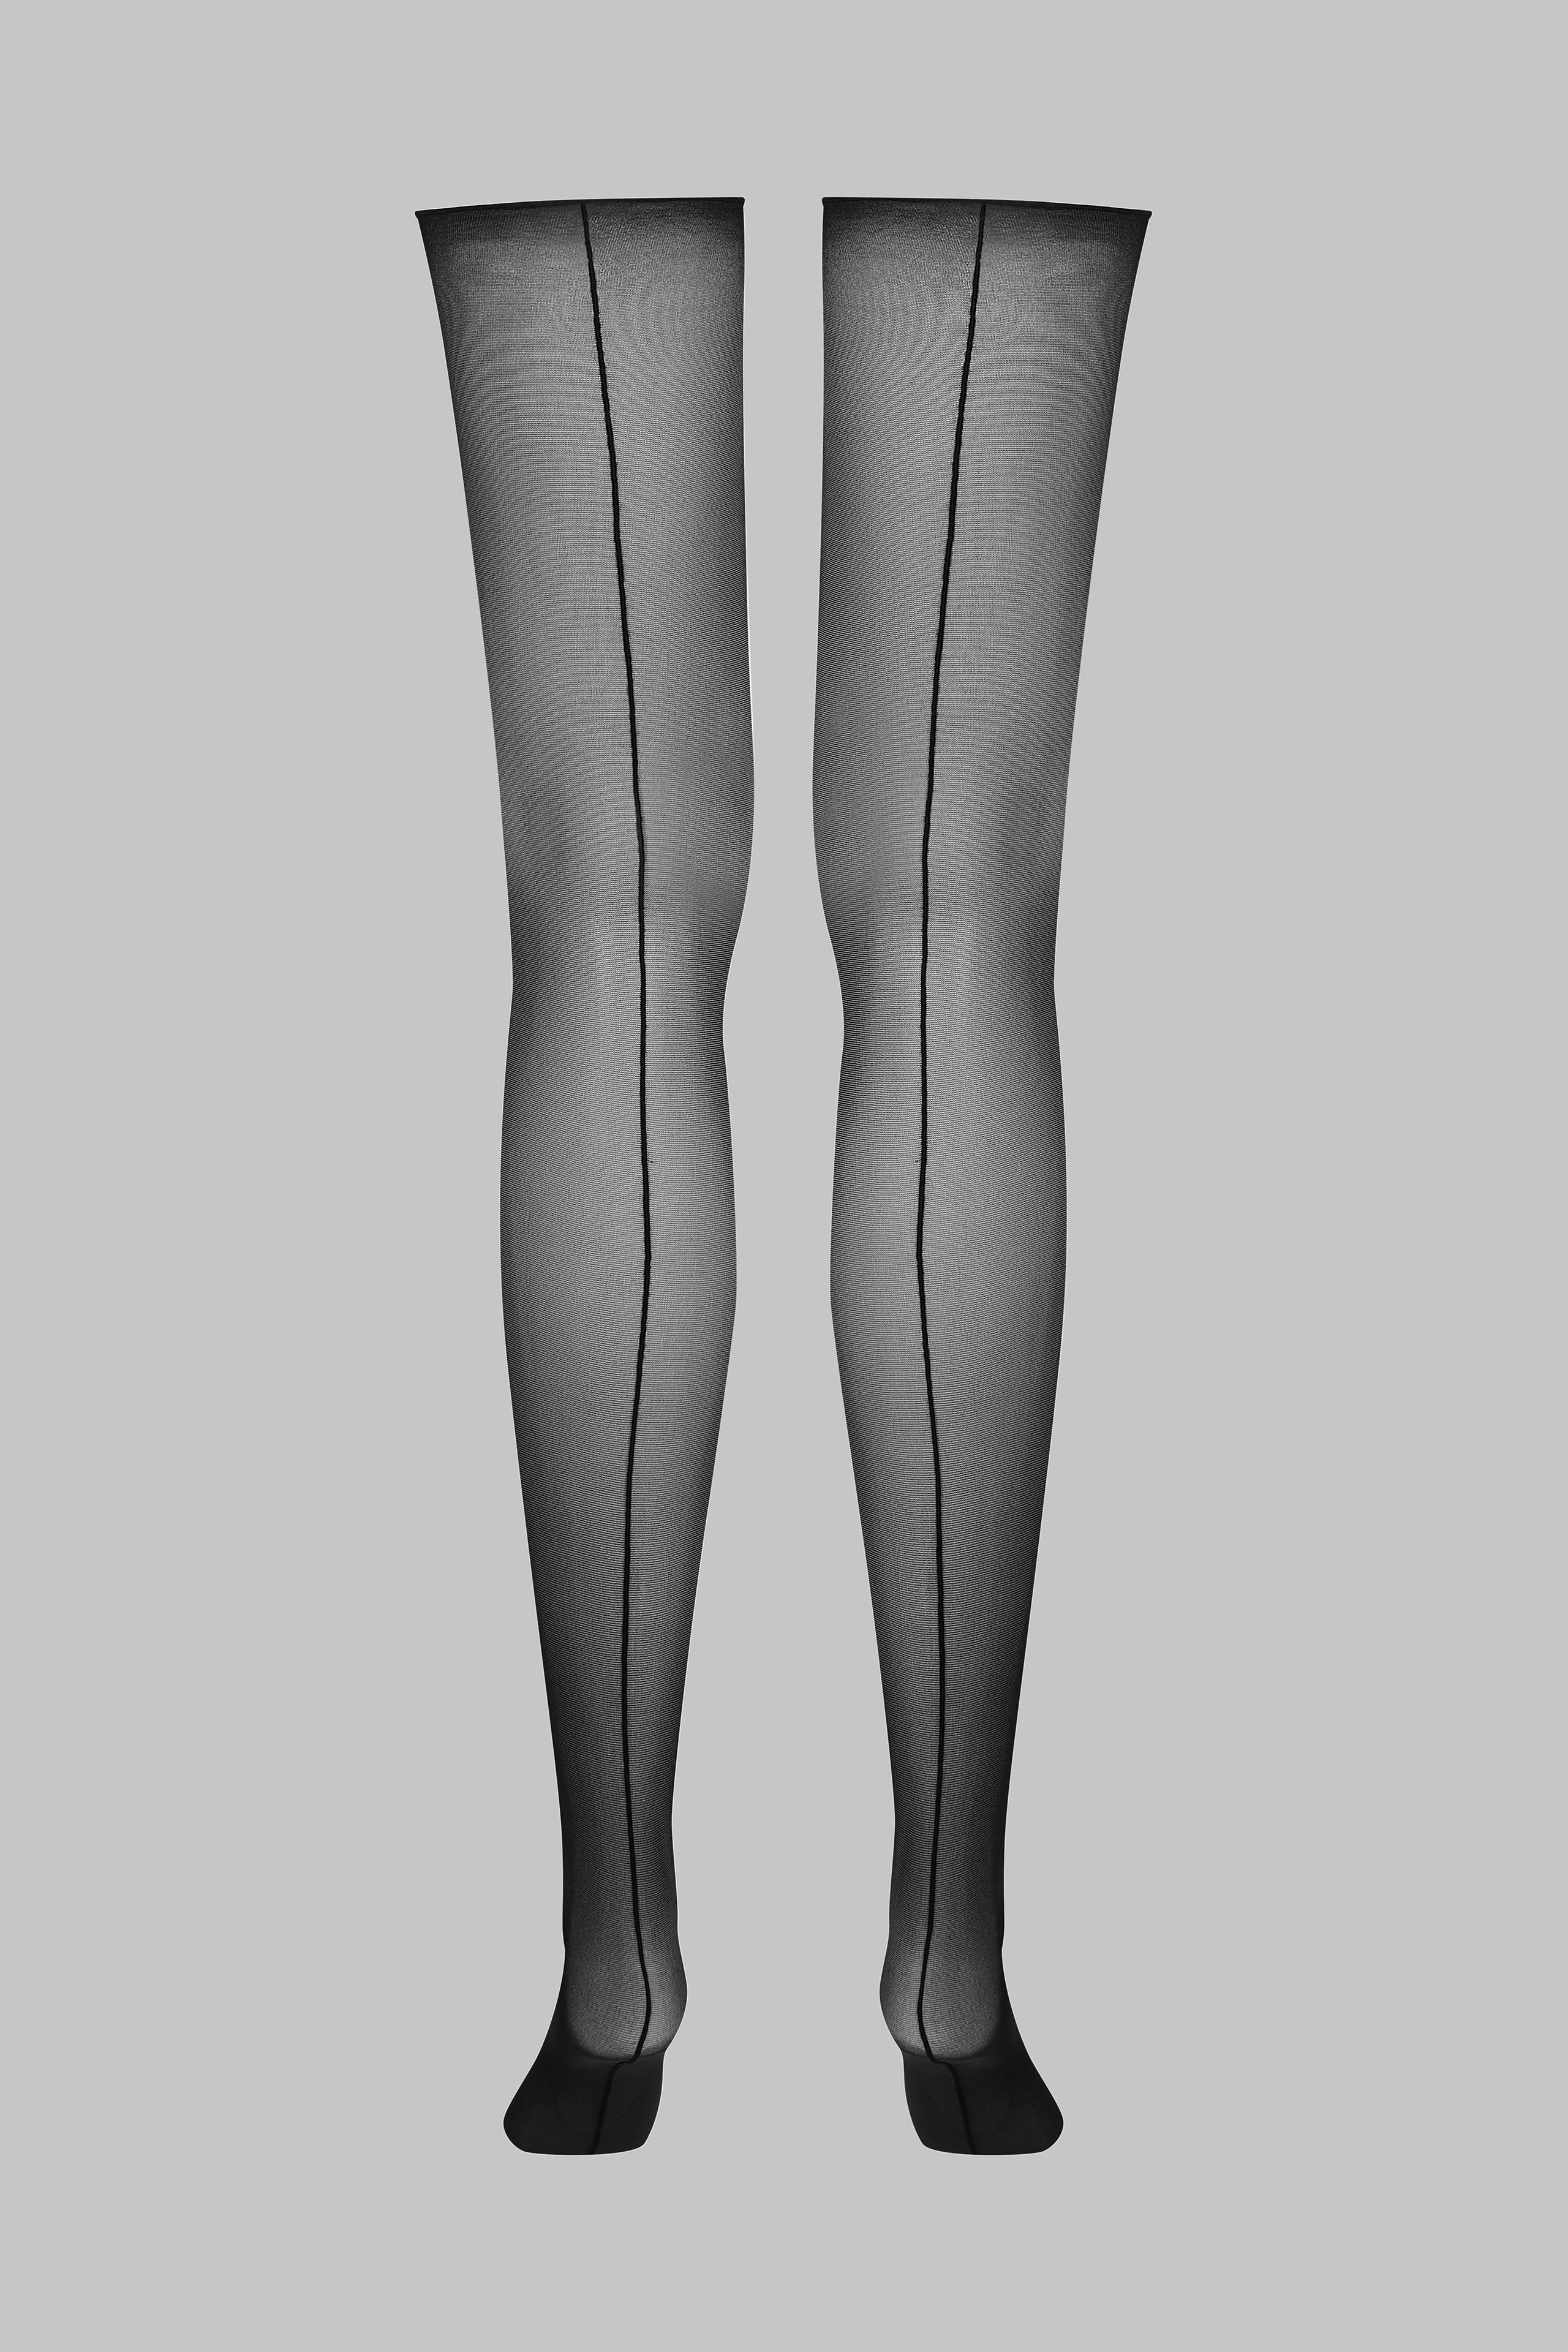 Cut and curled back seamed stockings - 20D